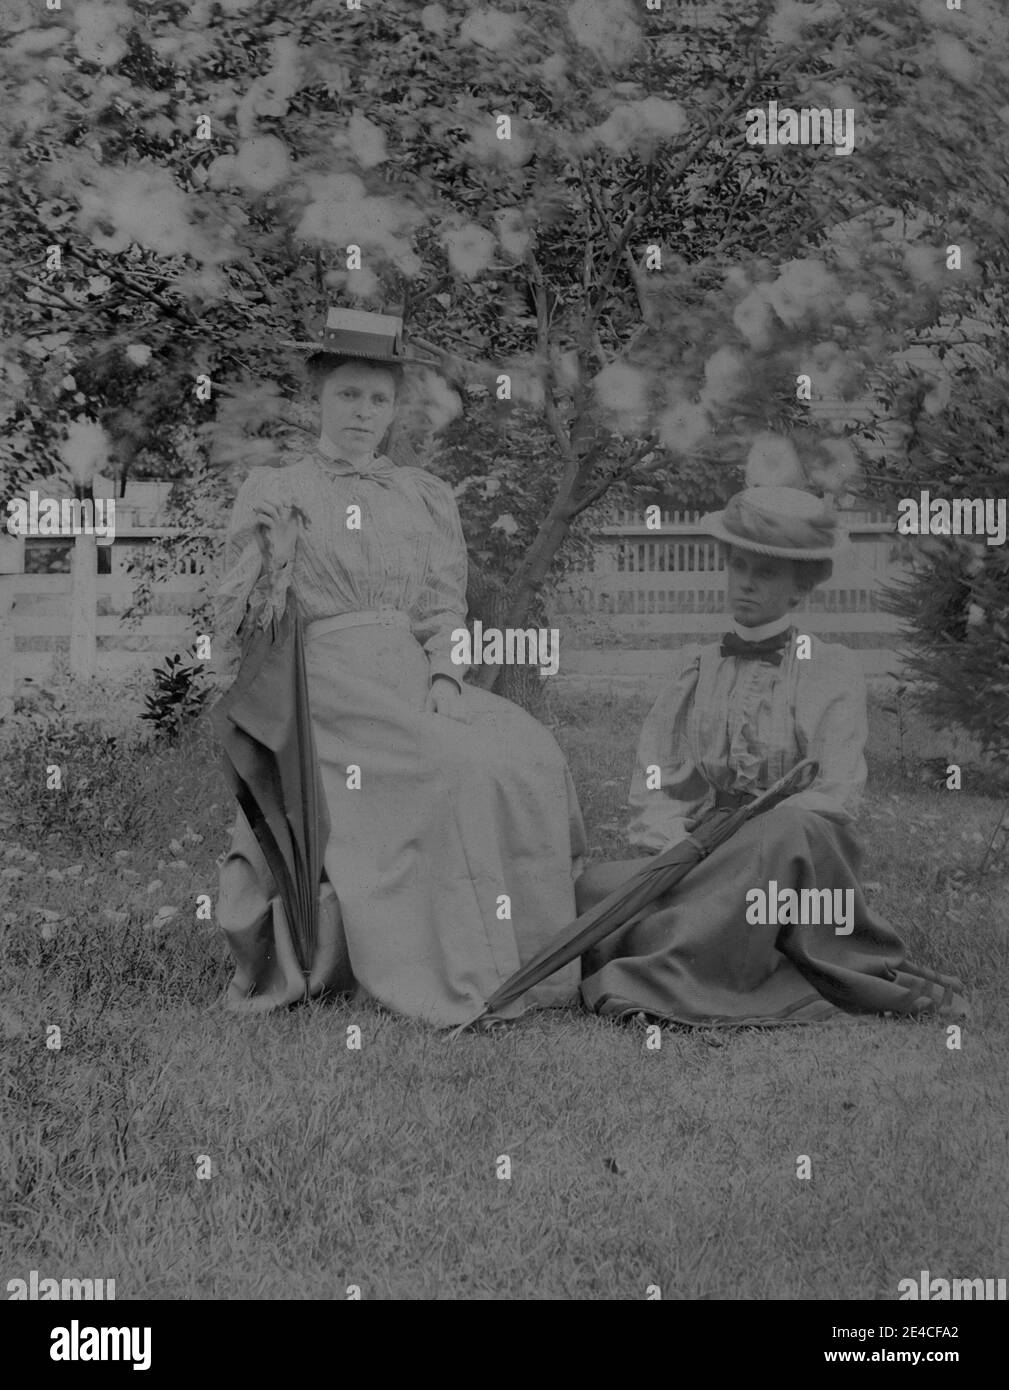 American archive monochrome portrait  of two young women in a garden in front of a blossom tree. One woman is sitting on a chair and one woman is sitting on the grass. The women are holding parasols and wearing skirts and blouses and straw hats. Taken in the late 19th century in Port Byron, NY, USA Stock Photo